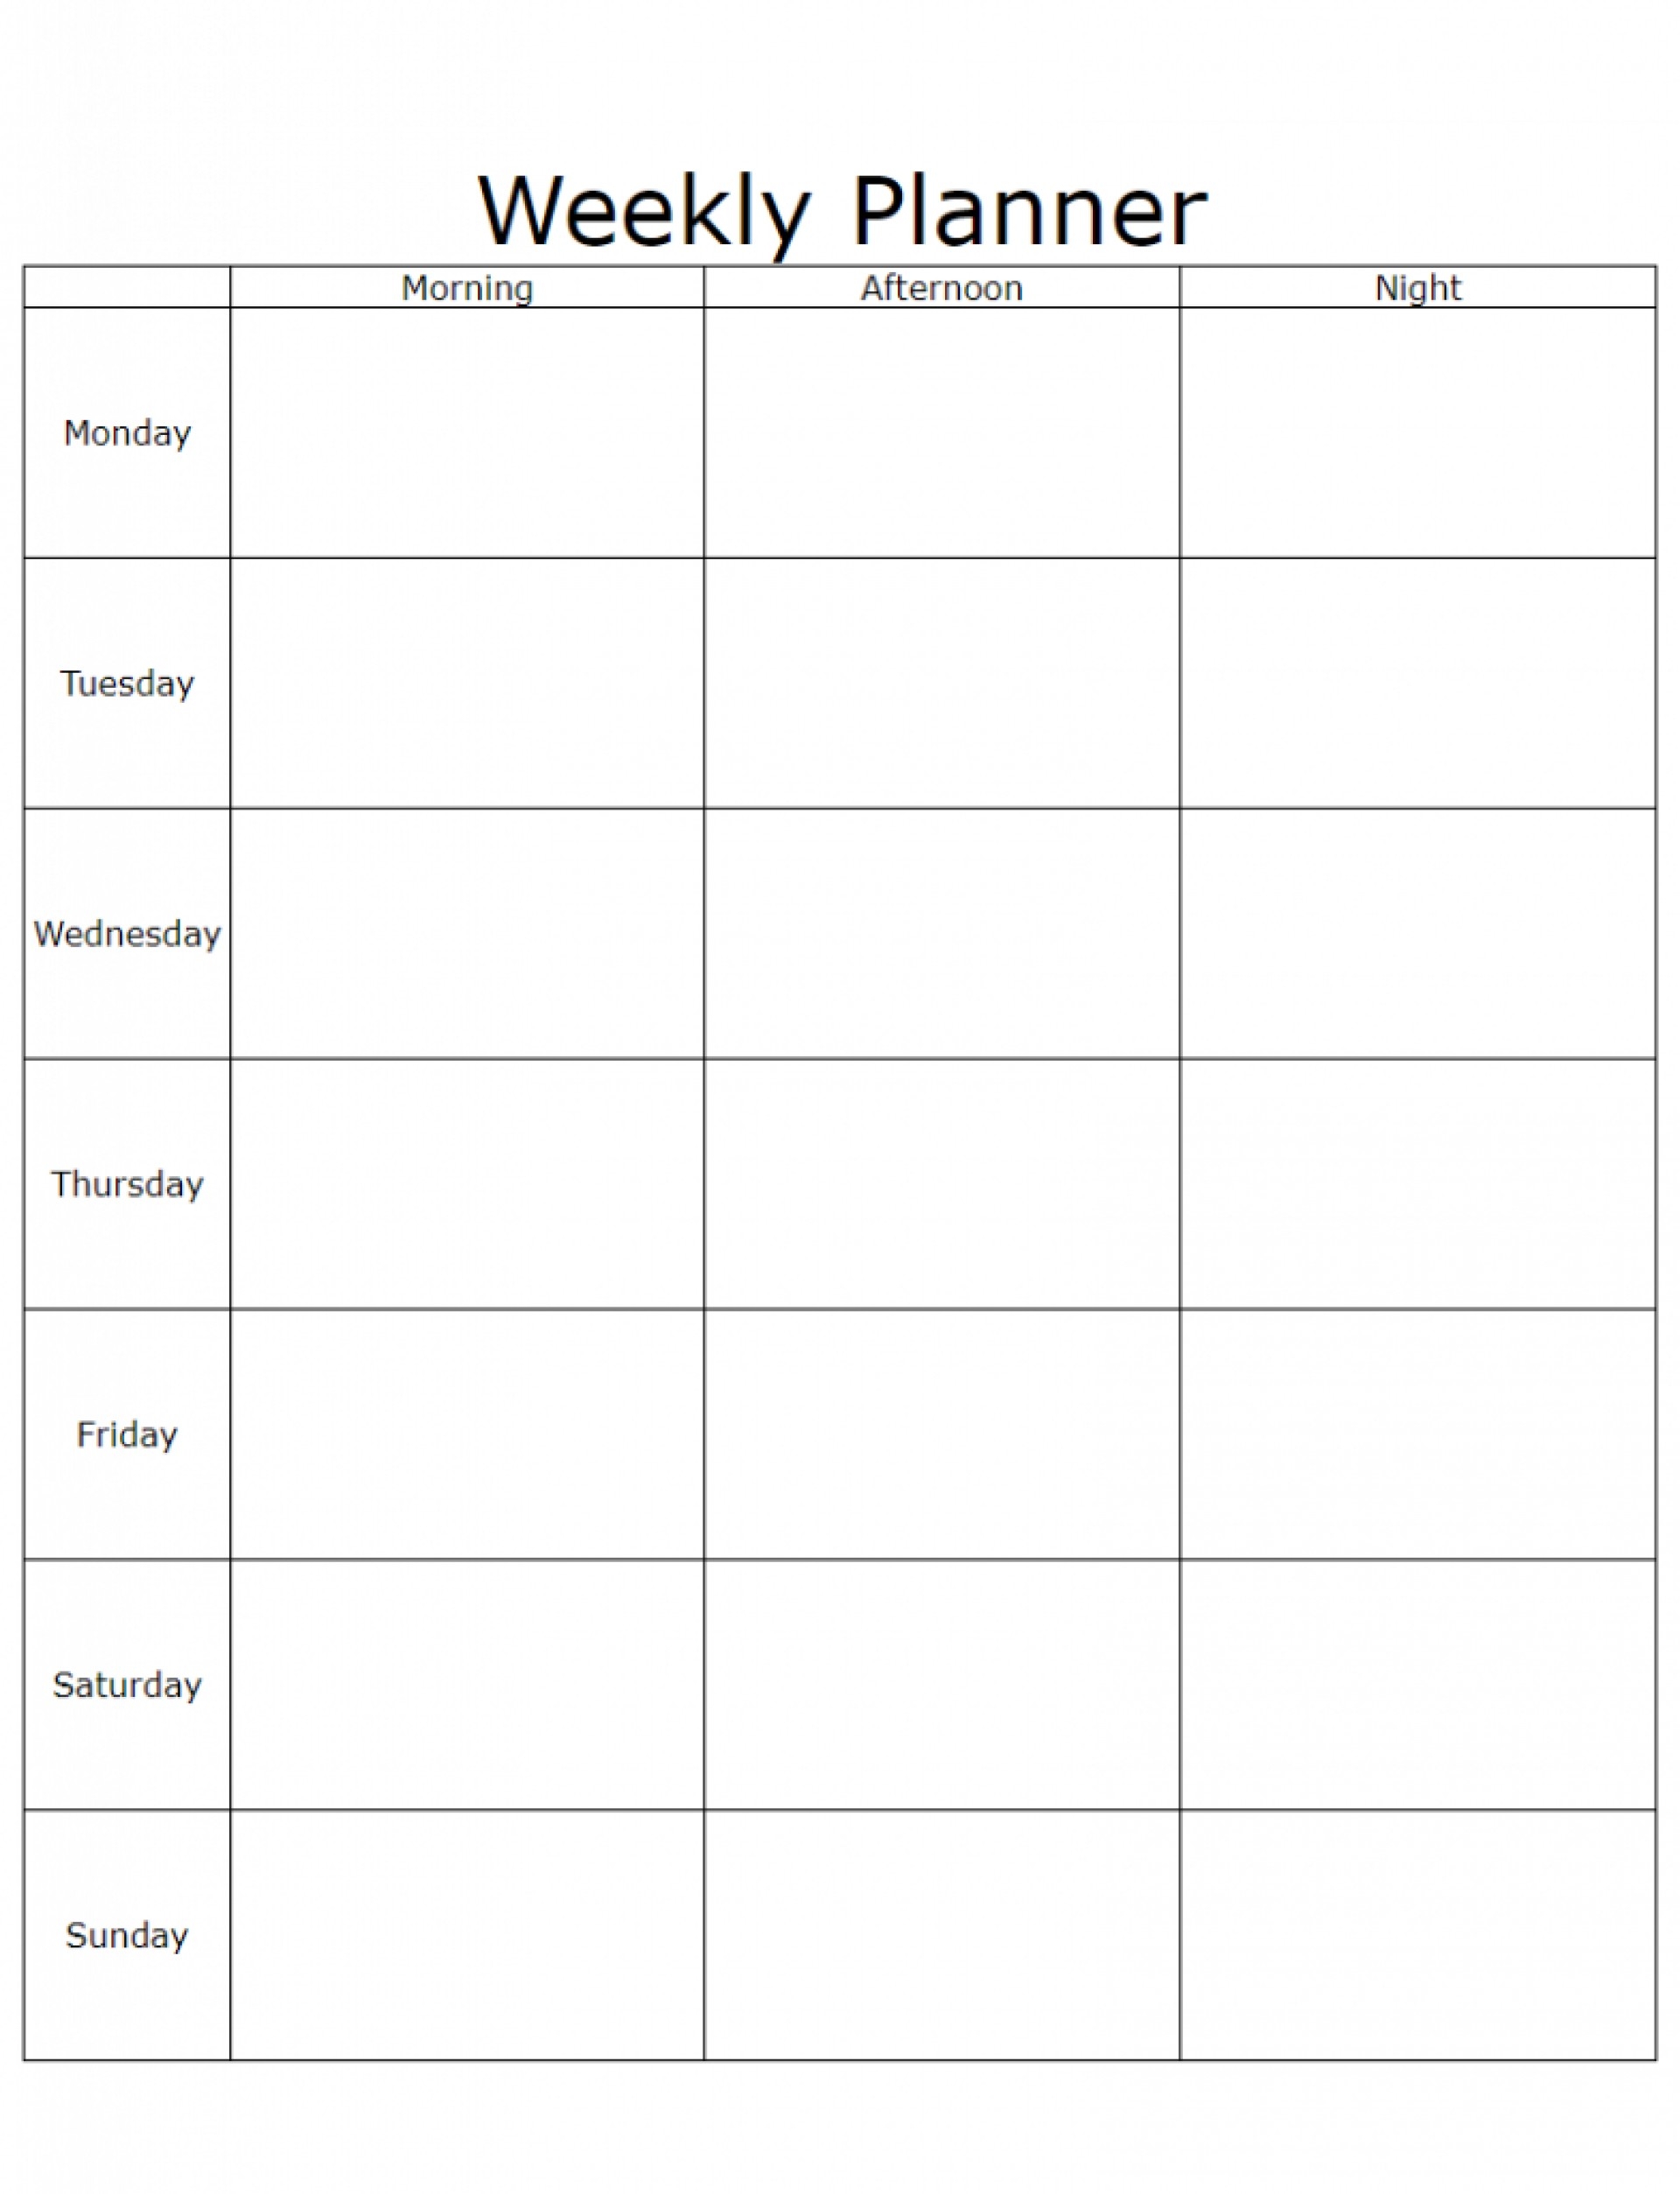 001 Weekly Schedule Word Template Rare Ideas Class Cute-Blank Printable Calendar With No Dates